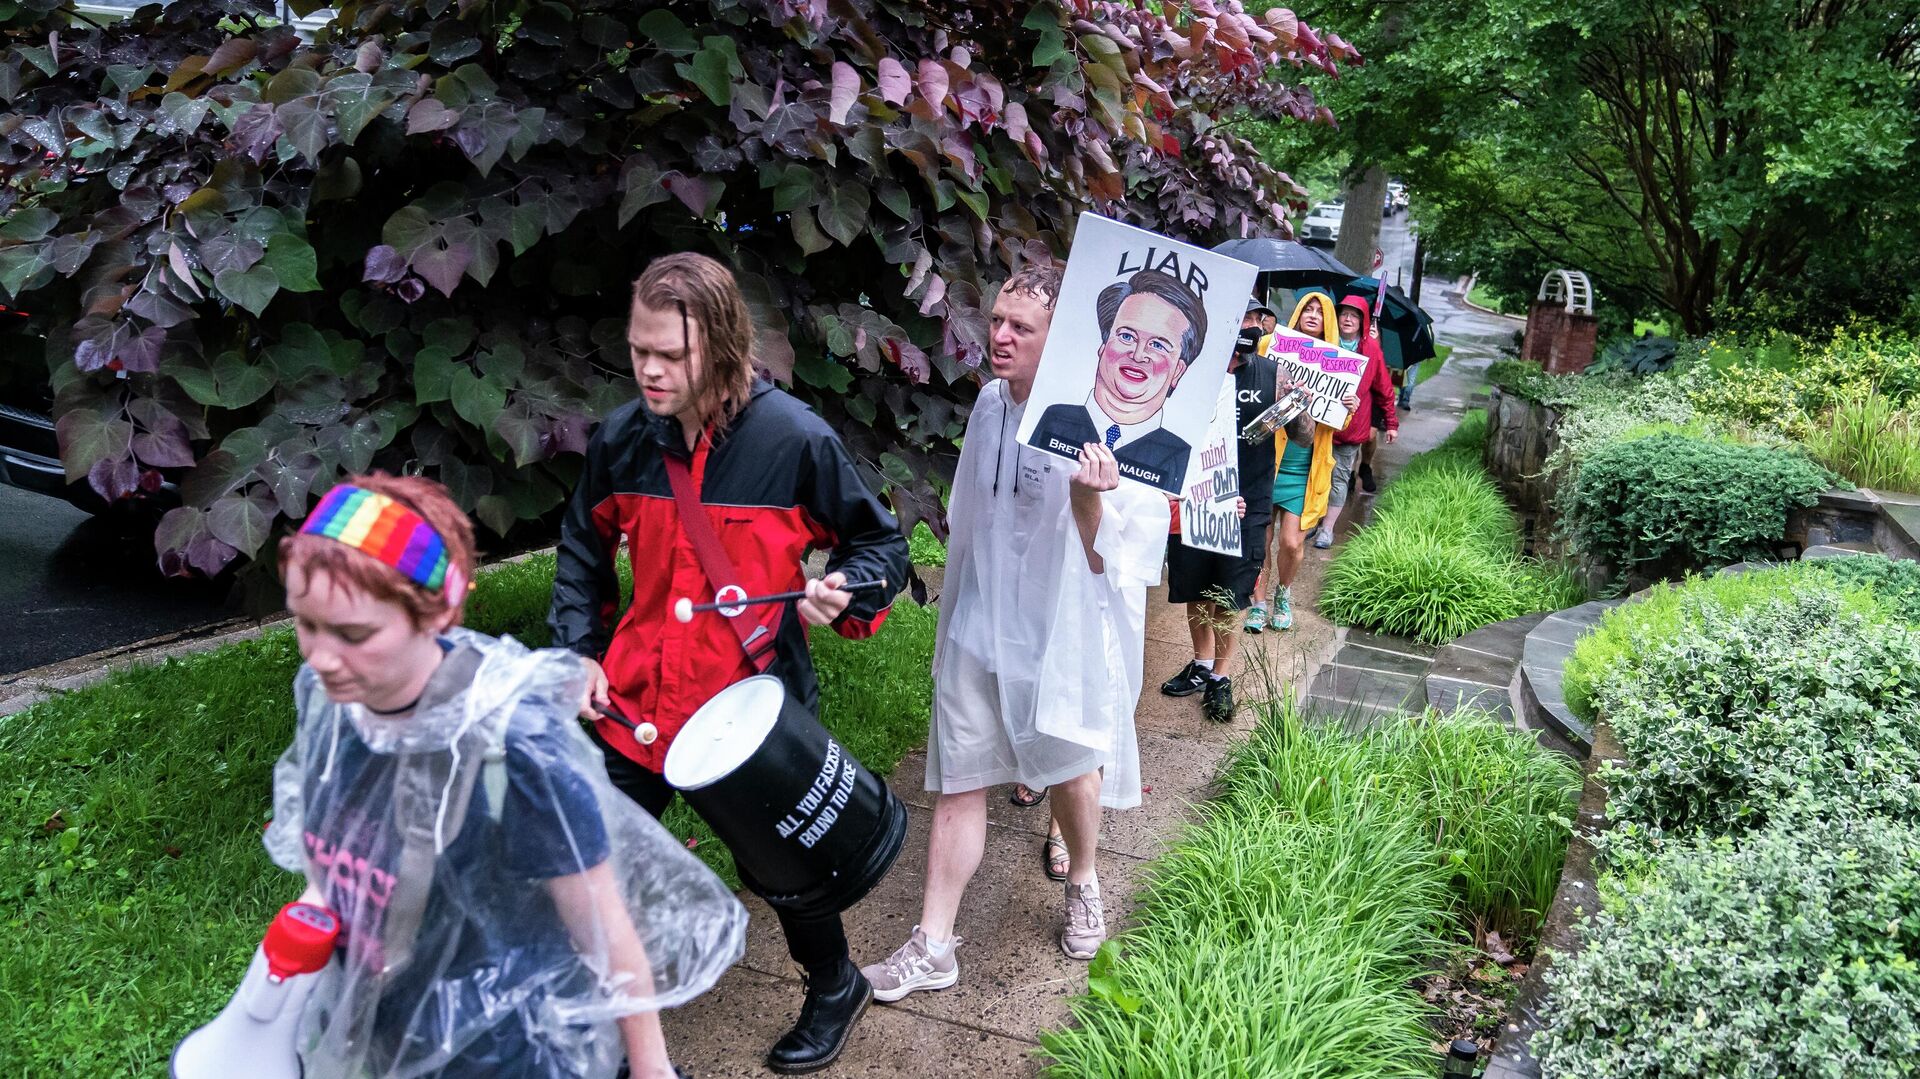 CHEVY CHASE, MD - JUNE 08: Protesters march past Supreme Court Justice Brett Kavanaugh's home on June 8, 2022 in Chevy Chase, Maryland. An armed man was arrested near Kavanaugh's home Wednesday morning as the court prepares to announce decisions for about 30 cases - Sputnik International, 1920, 09.06.2022